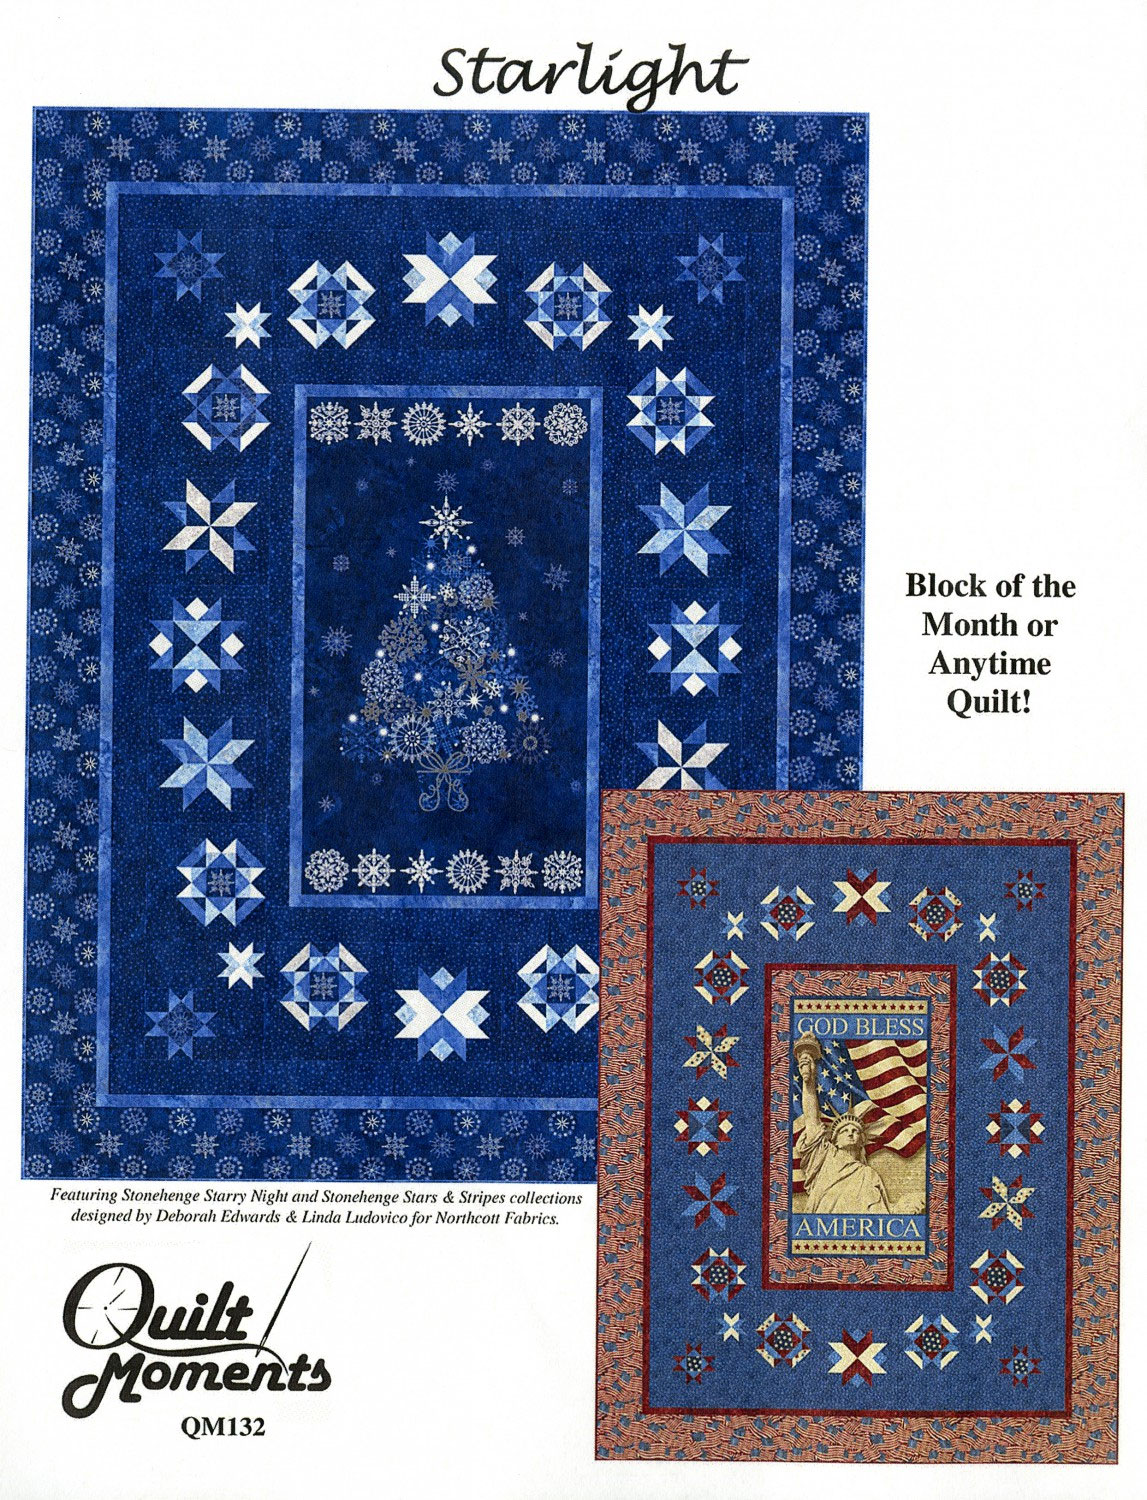 Starlight-quilt-sewing-pattern-Marilyn-Foreman-Quilt-Moments-front